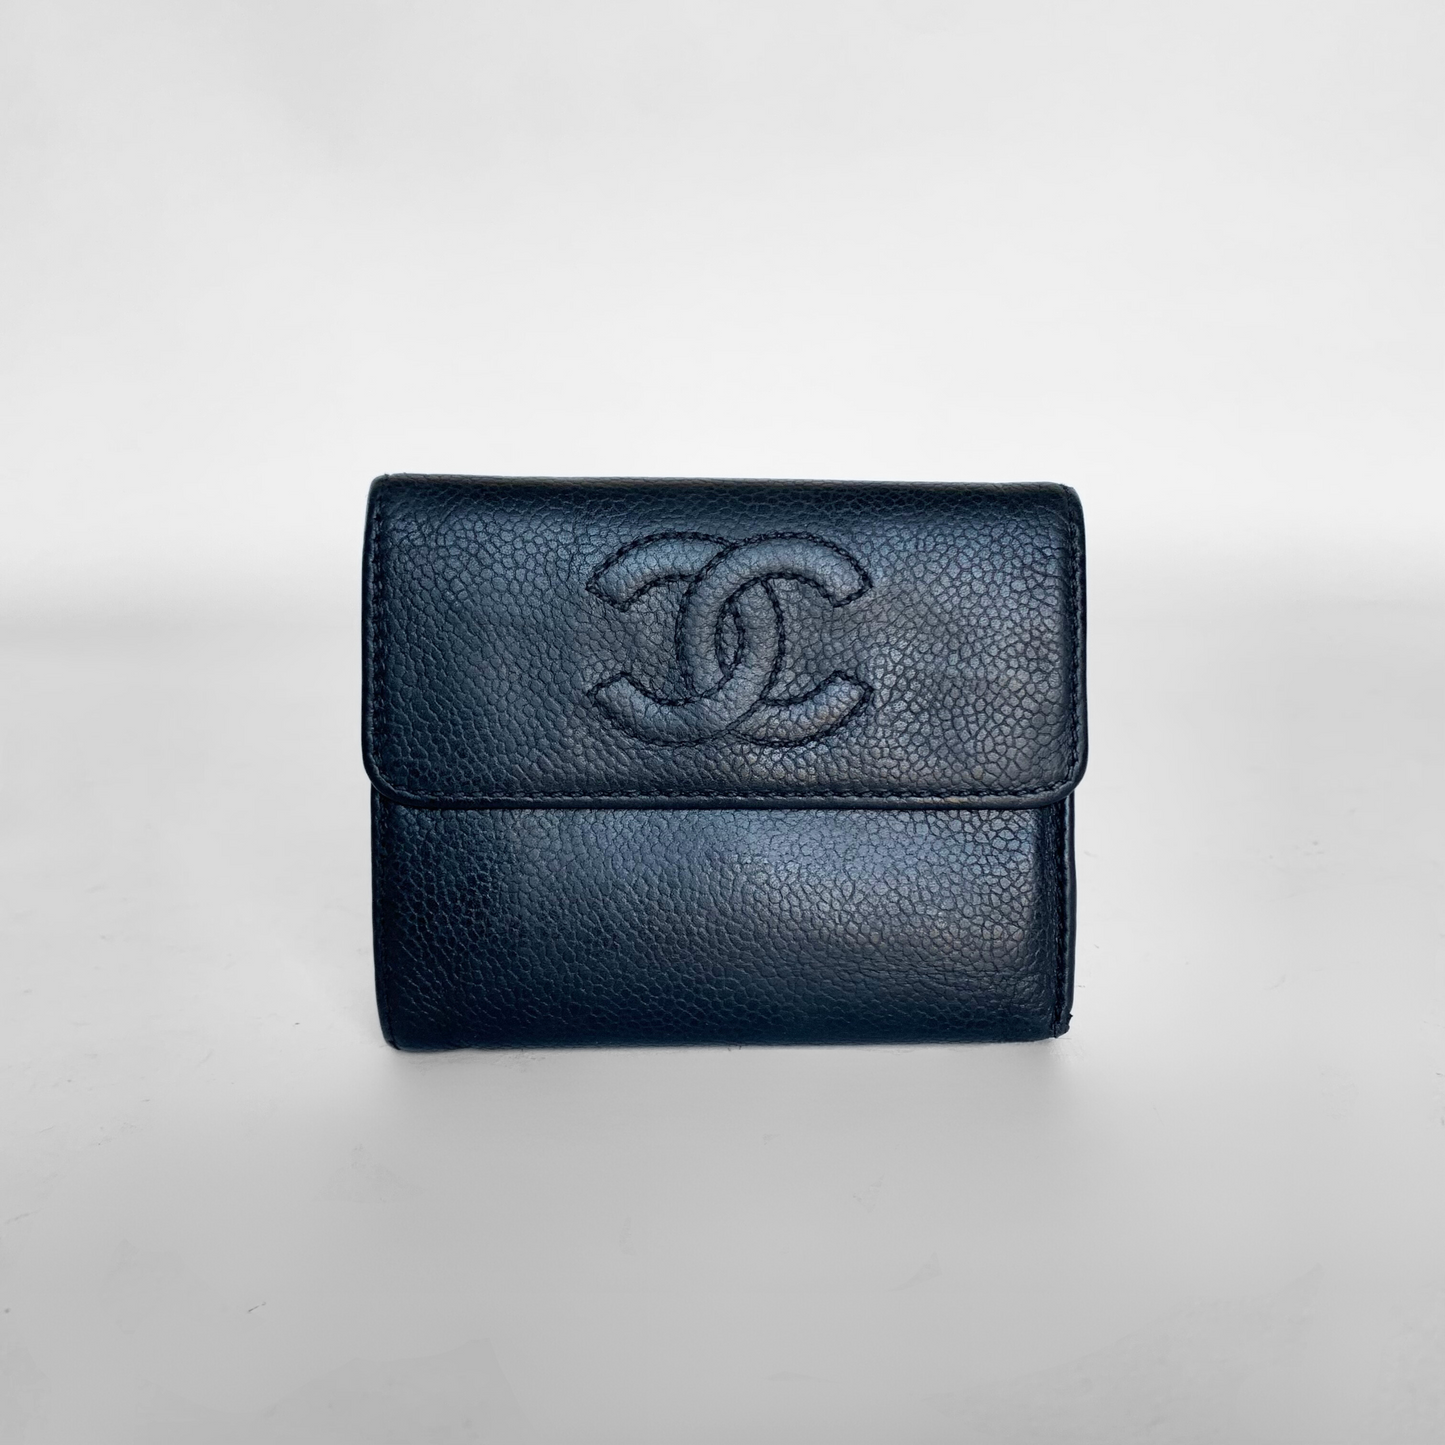 Chanel Chanel Πορτοφόλι Small Caviar Leather - wallet - Etoile Luxury Vintage